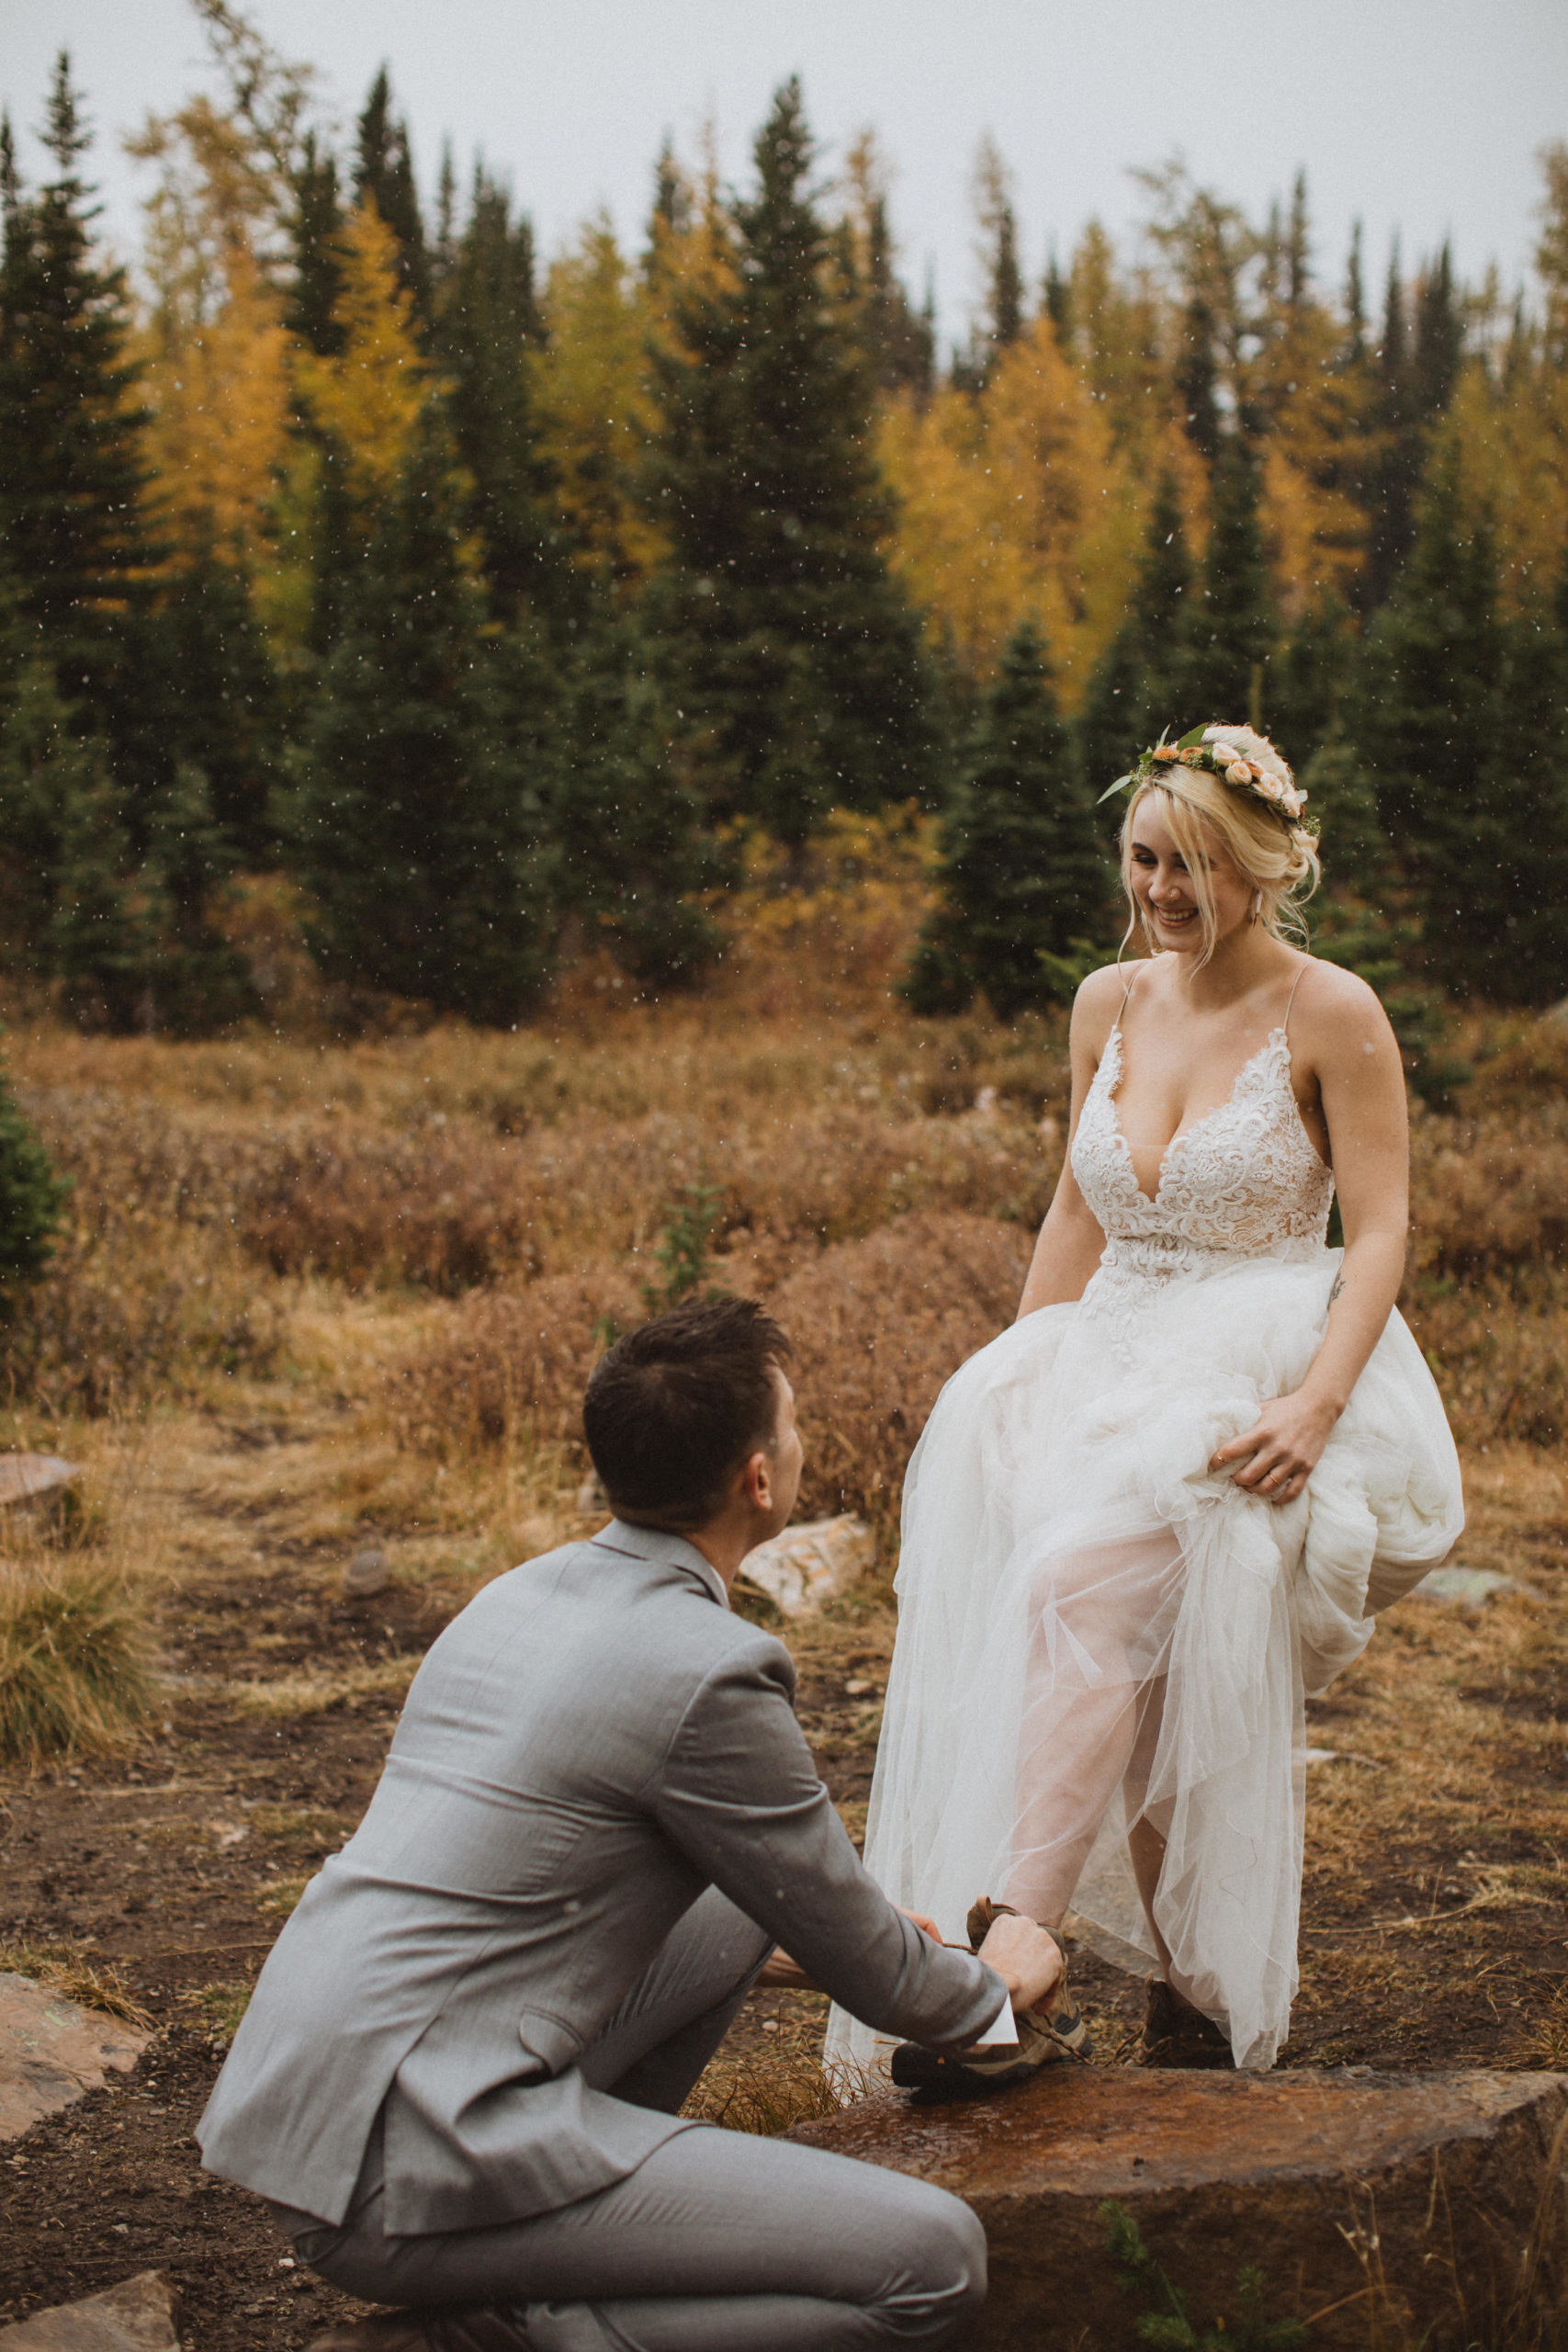 groom tying bride's hiking boots as they hit the trails on their elopement day hiking